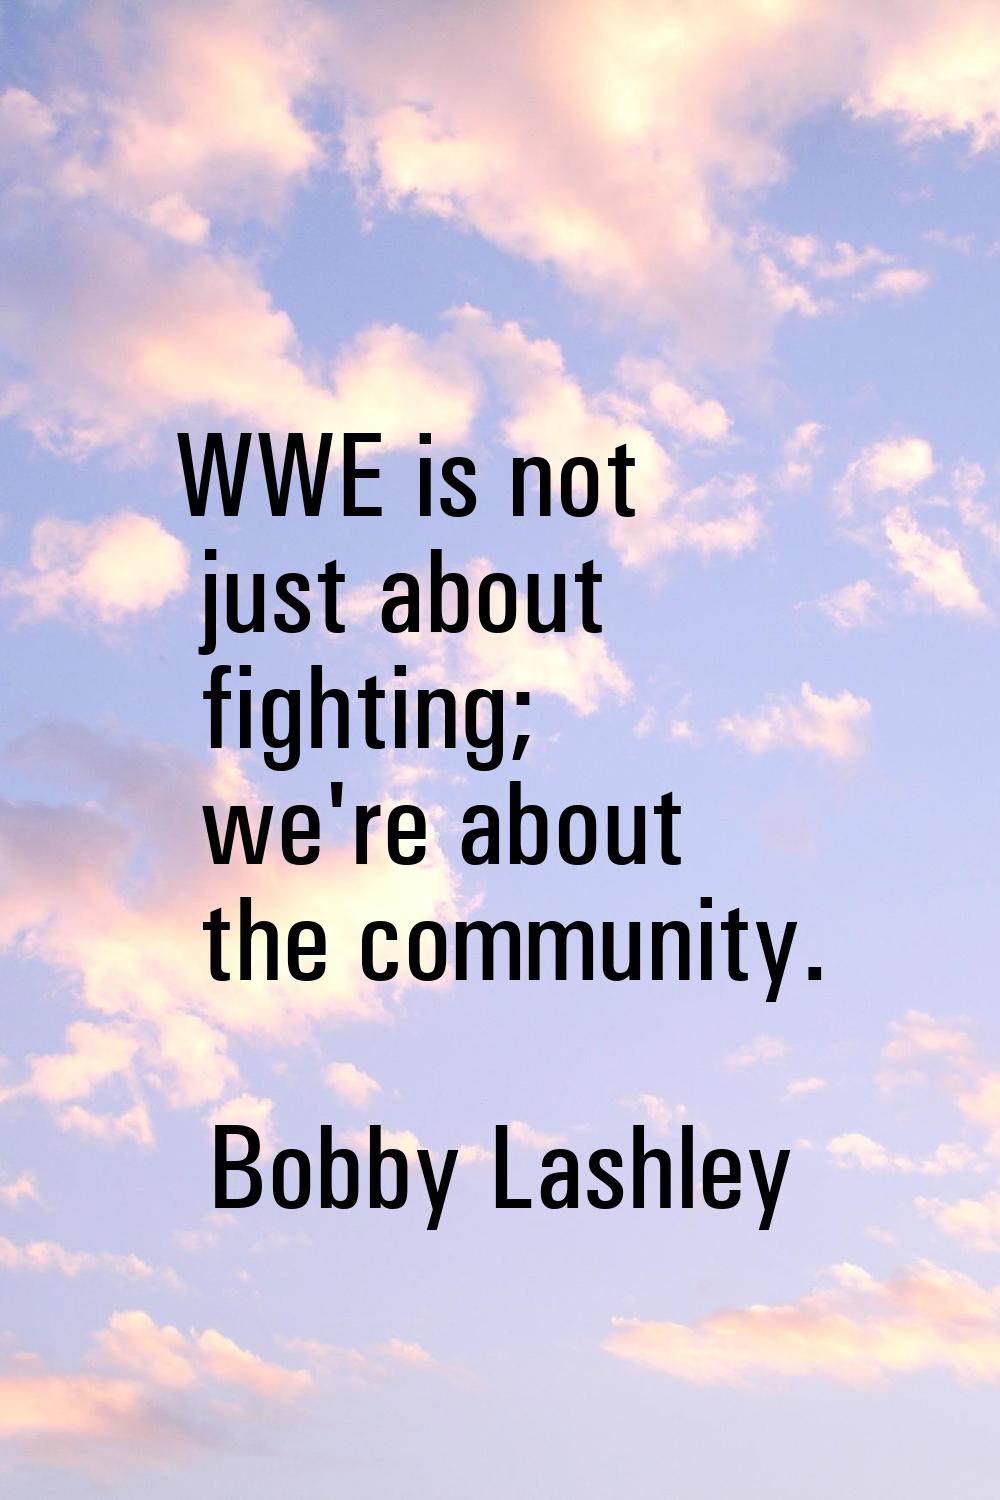 WWE is not just about fighting; we're about the community.